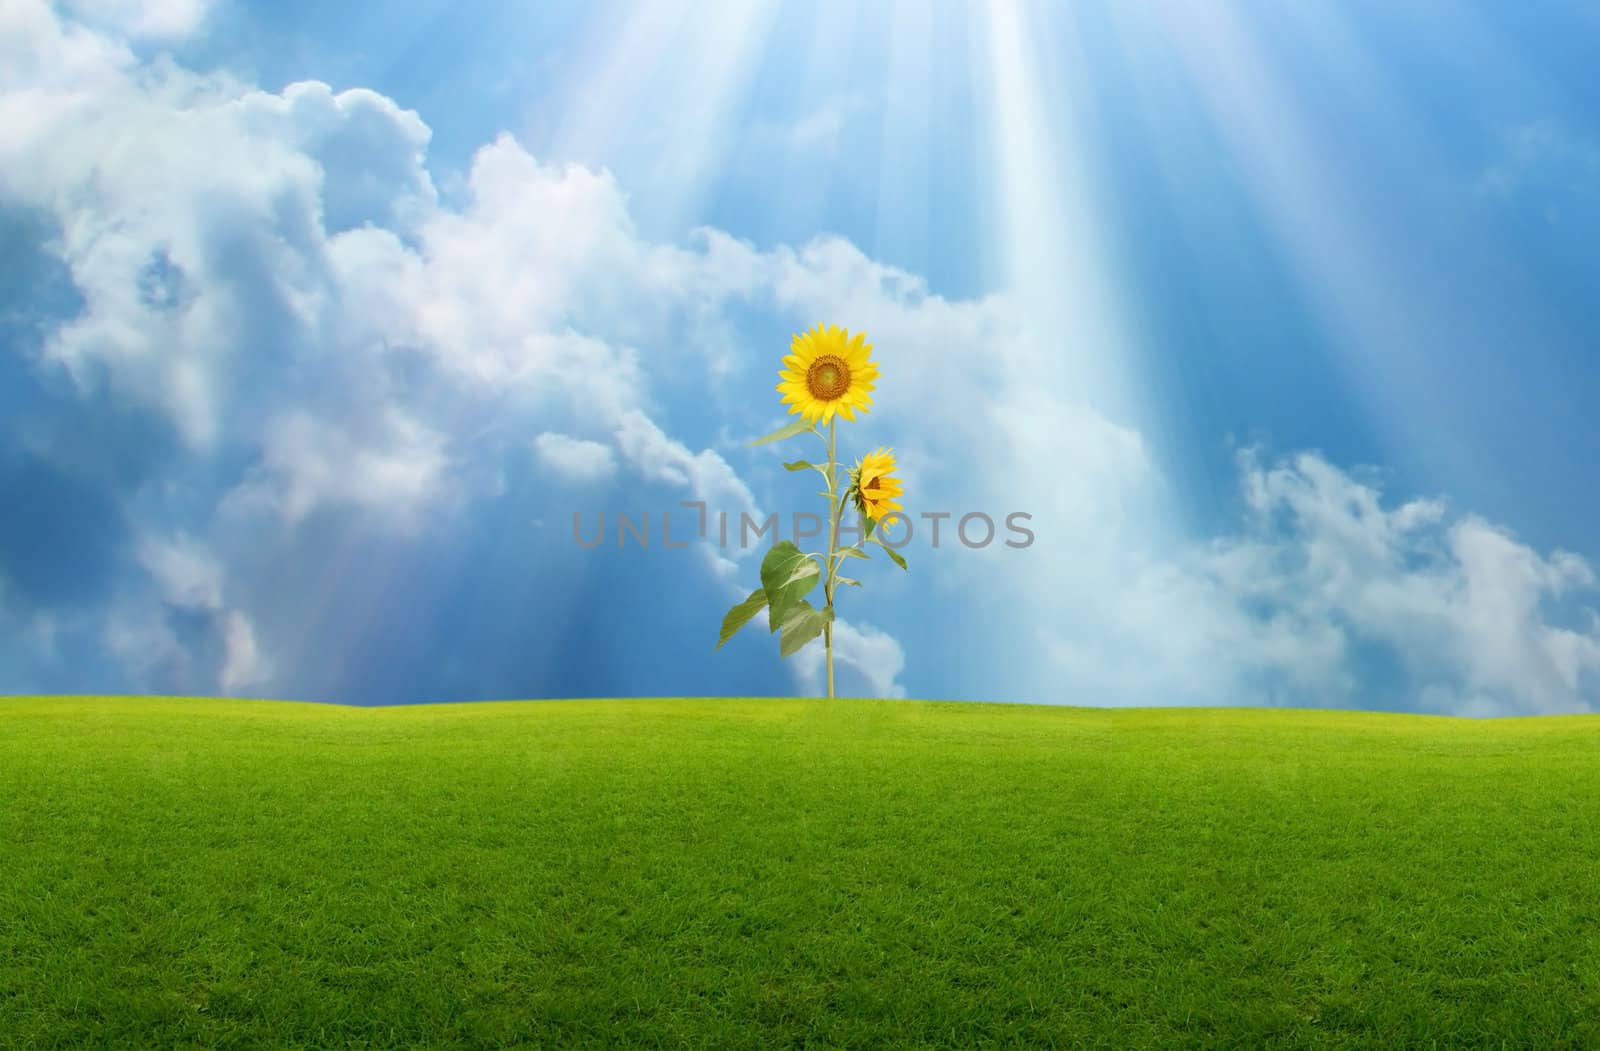 Grassland with sunflower and blue sky with sunlight background